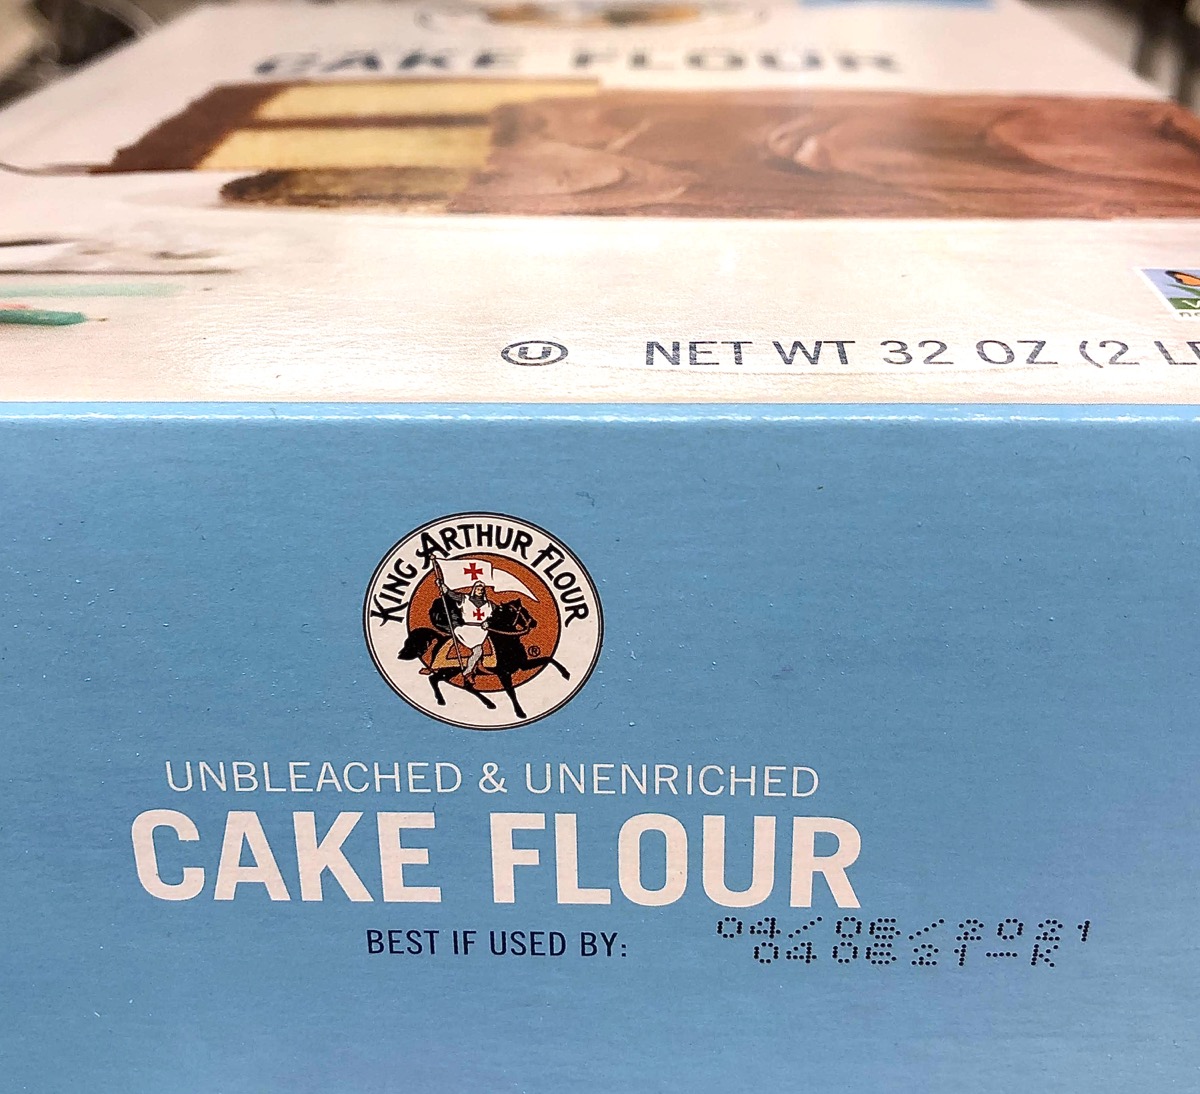 Bottom of box of cake flour showing best if used by date.